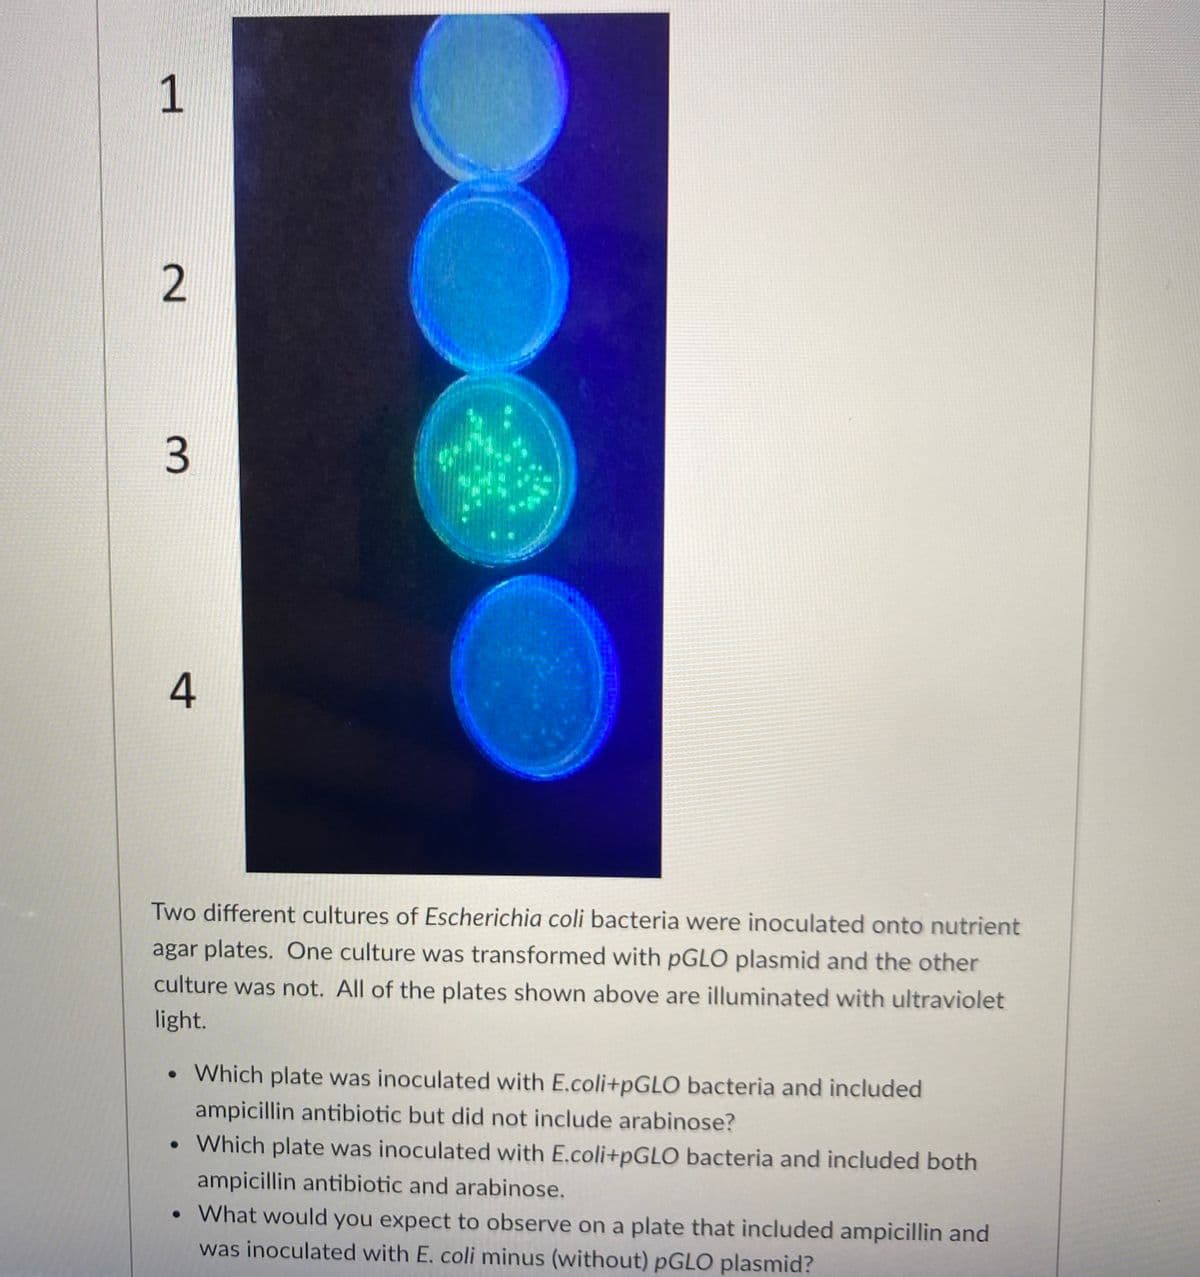 1
2.
3.
Two different cultures of Escherichia coli bacteria were inoculated onto nutrient
agar plates. One culture was transformed with pGLO plasmid and the other
culture was not. All of the plates shown above are illuminated with ultraviolet
light.
• Which plate was inoculated with E.coli+PGLO bacteria and included
ampicillin antibiotic but did not include arabinose?
• Which plate was inoculated with E.coli+pGLO bacteria and included both
ampicillin antibiotic and arabinose.
• What would you expect to observe on a plate that included ampicillin and
was inoculated with E. coli minus (without) PGLO plasmid?
